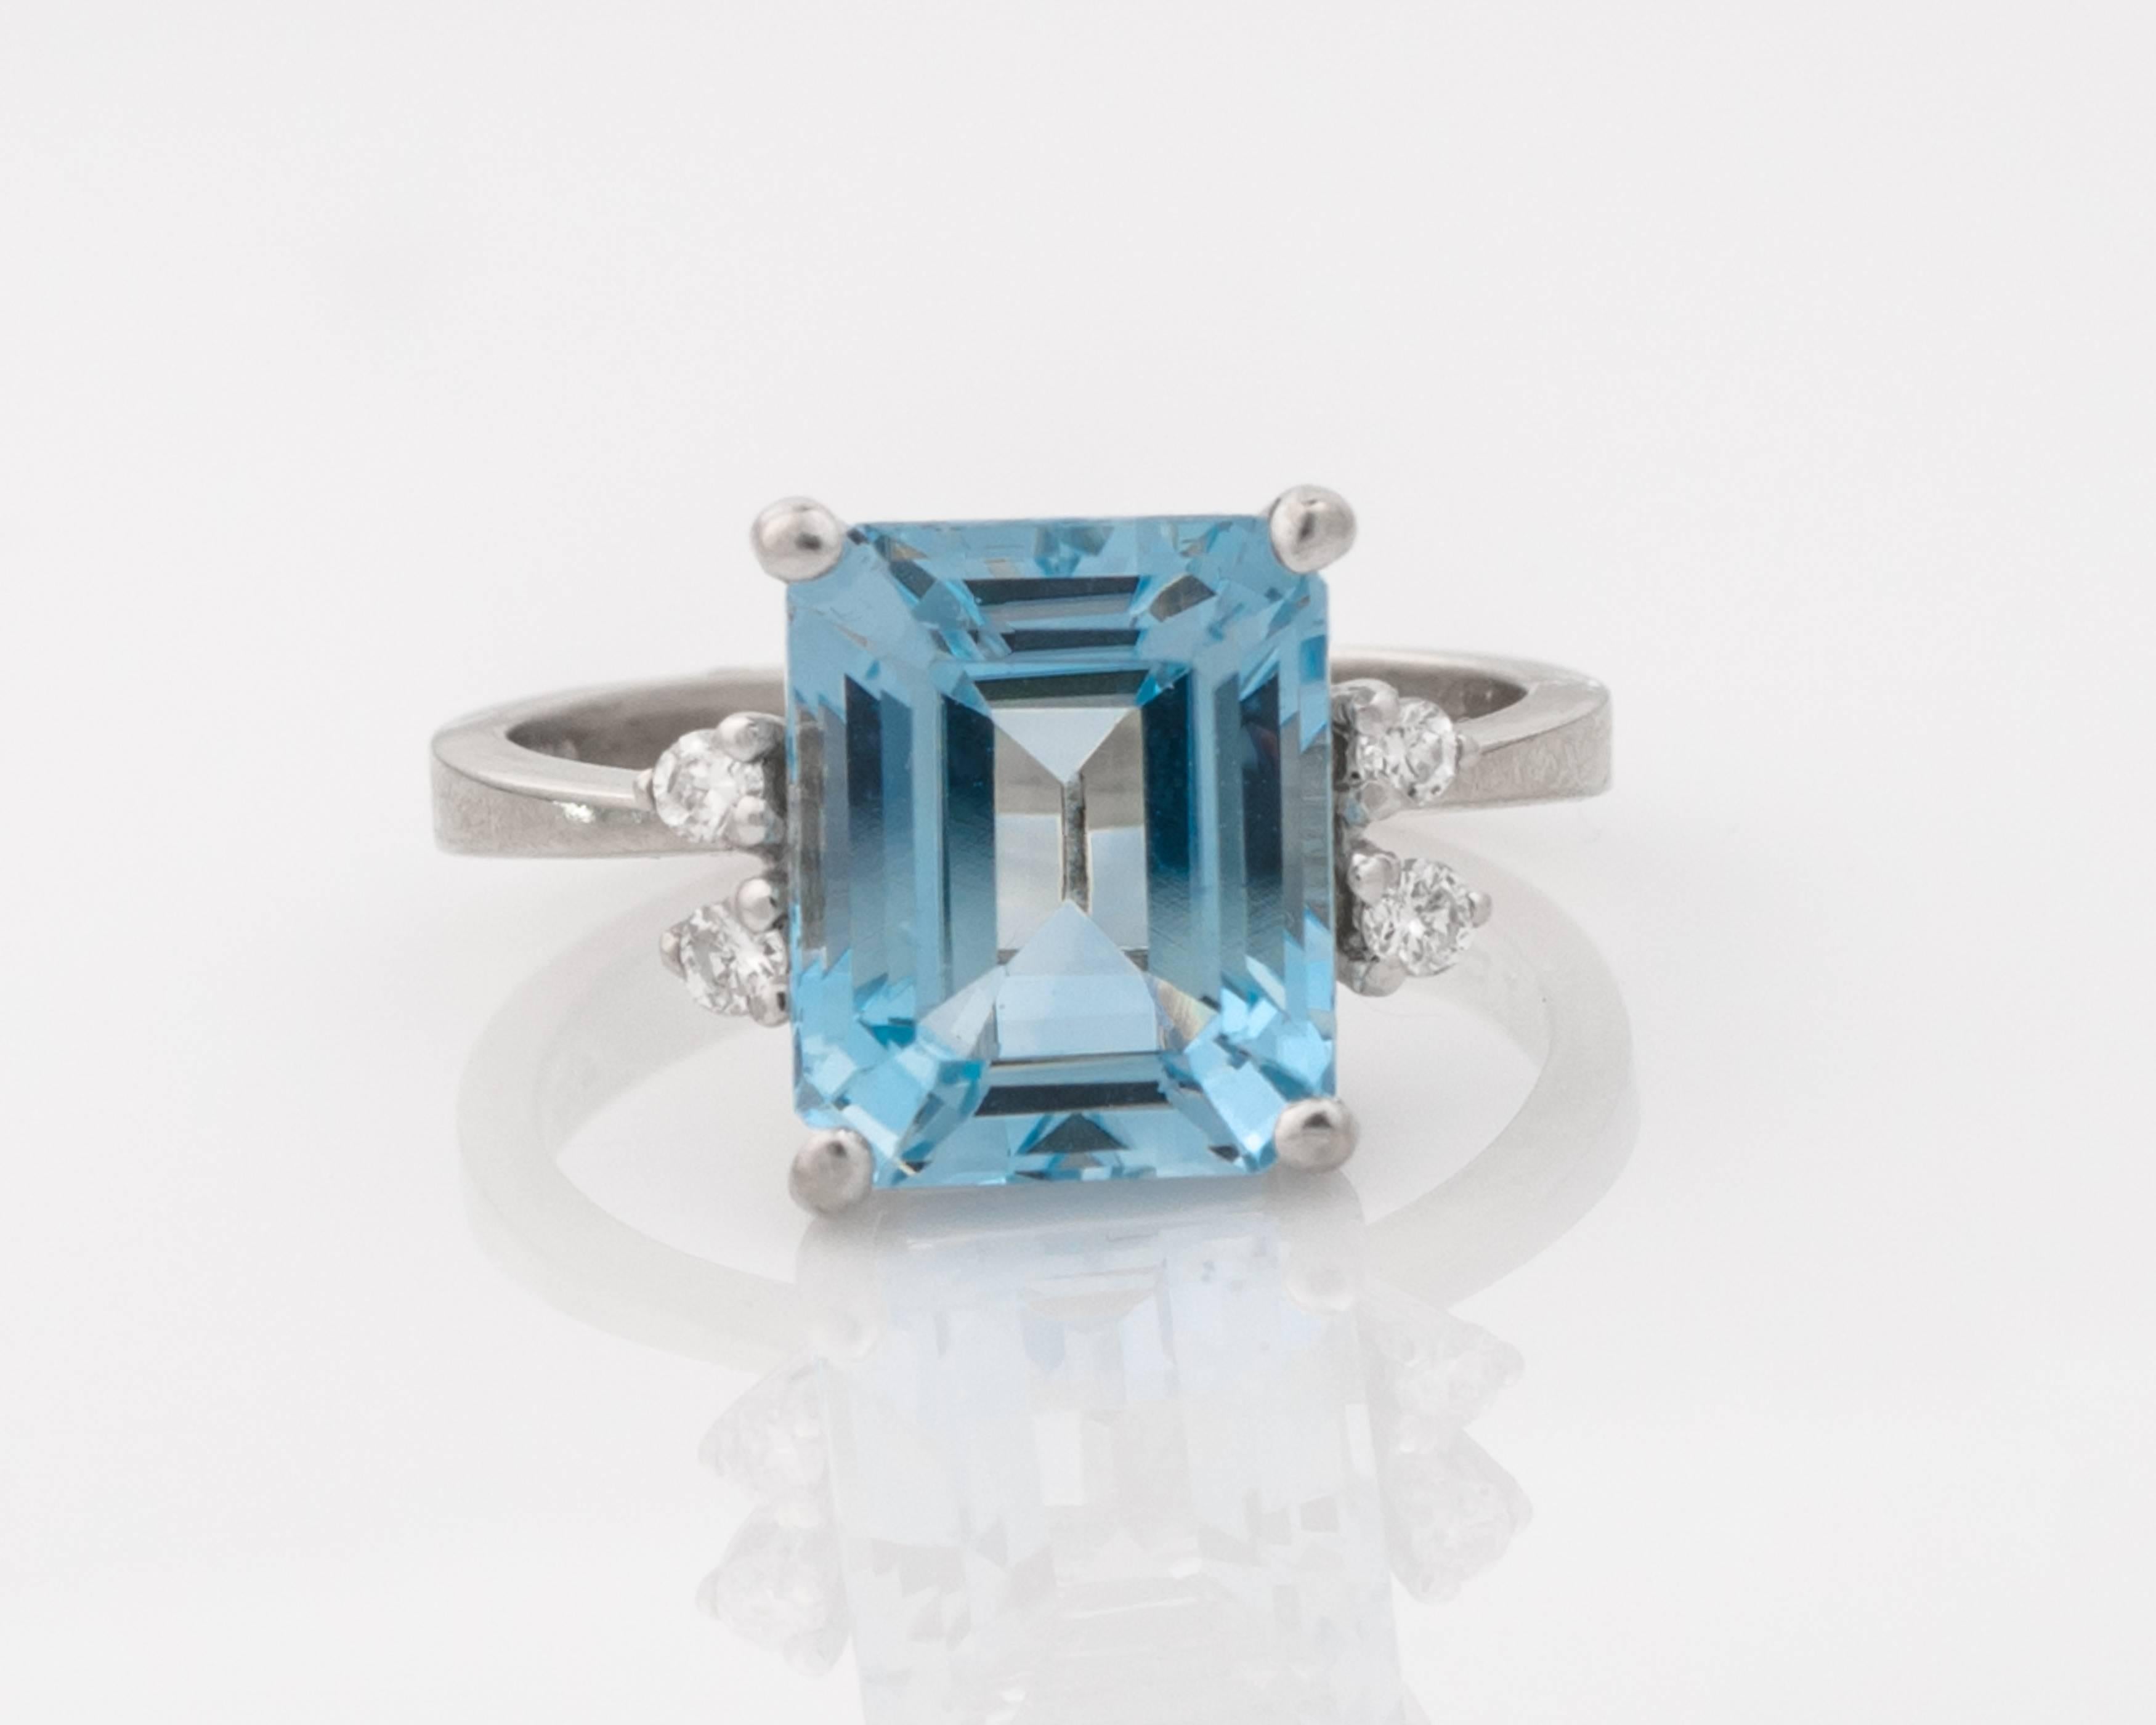 This 1980s Aquamarine and 14 Karat White Gold ring features a 5 carat Aquamarine accented by 4 round brilliant diamonds totaling 0.12 carats total weight. The aquamarine is held with four prongs in a high cathedral setting. The diamonds are also